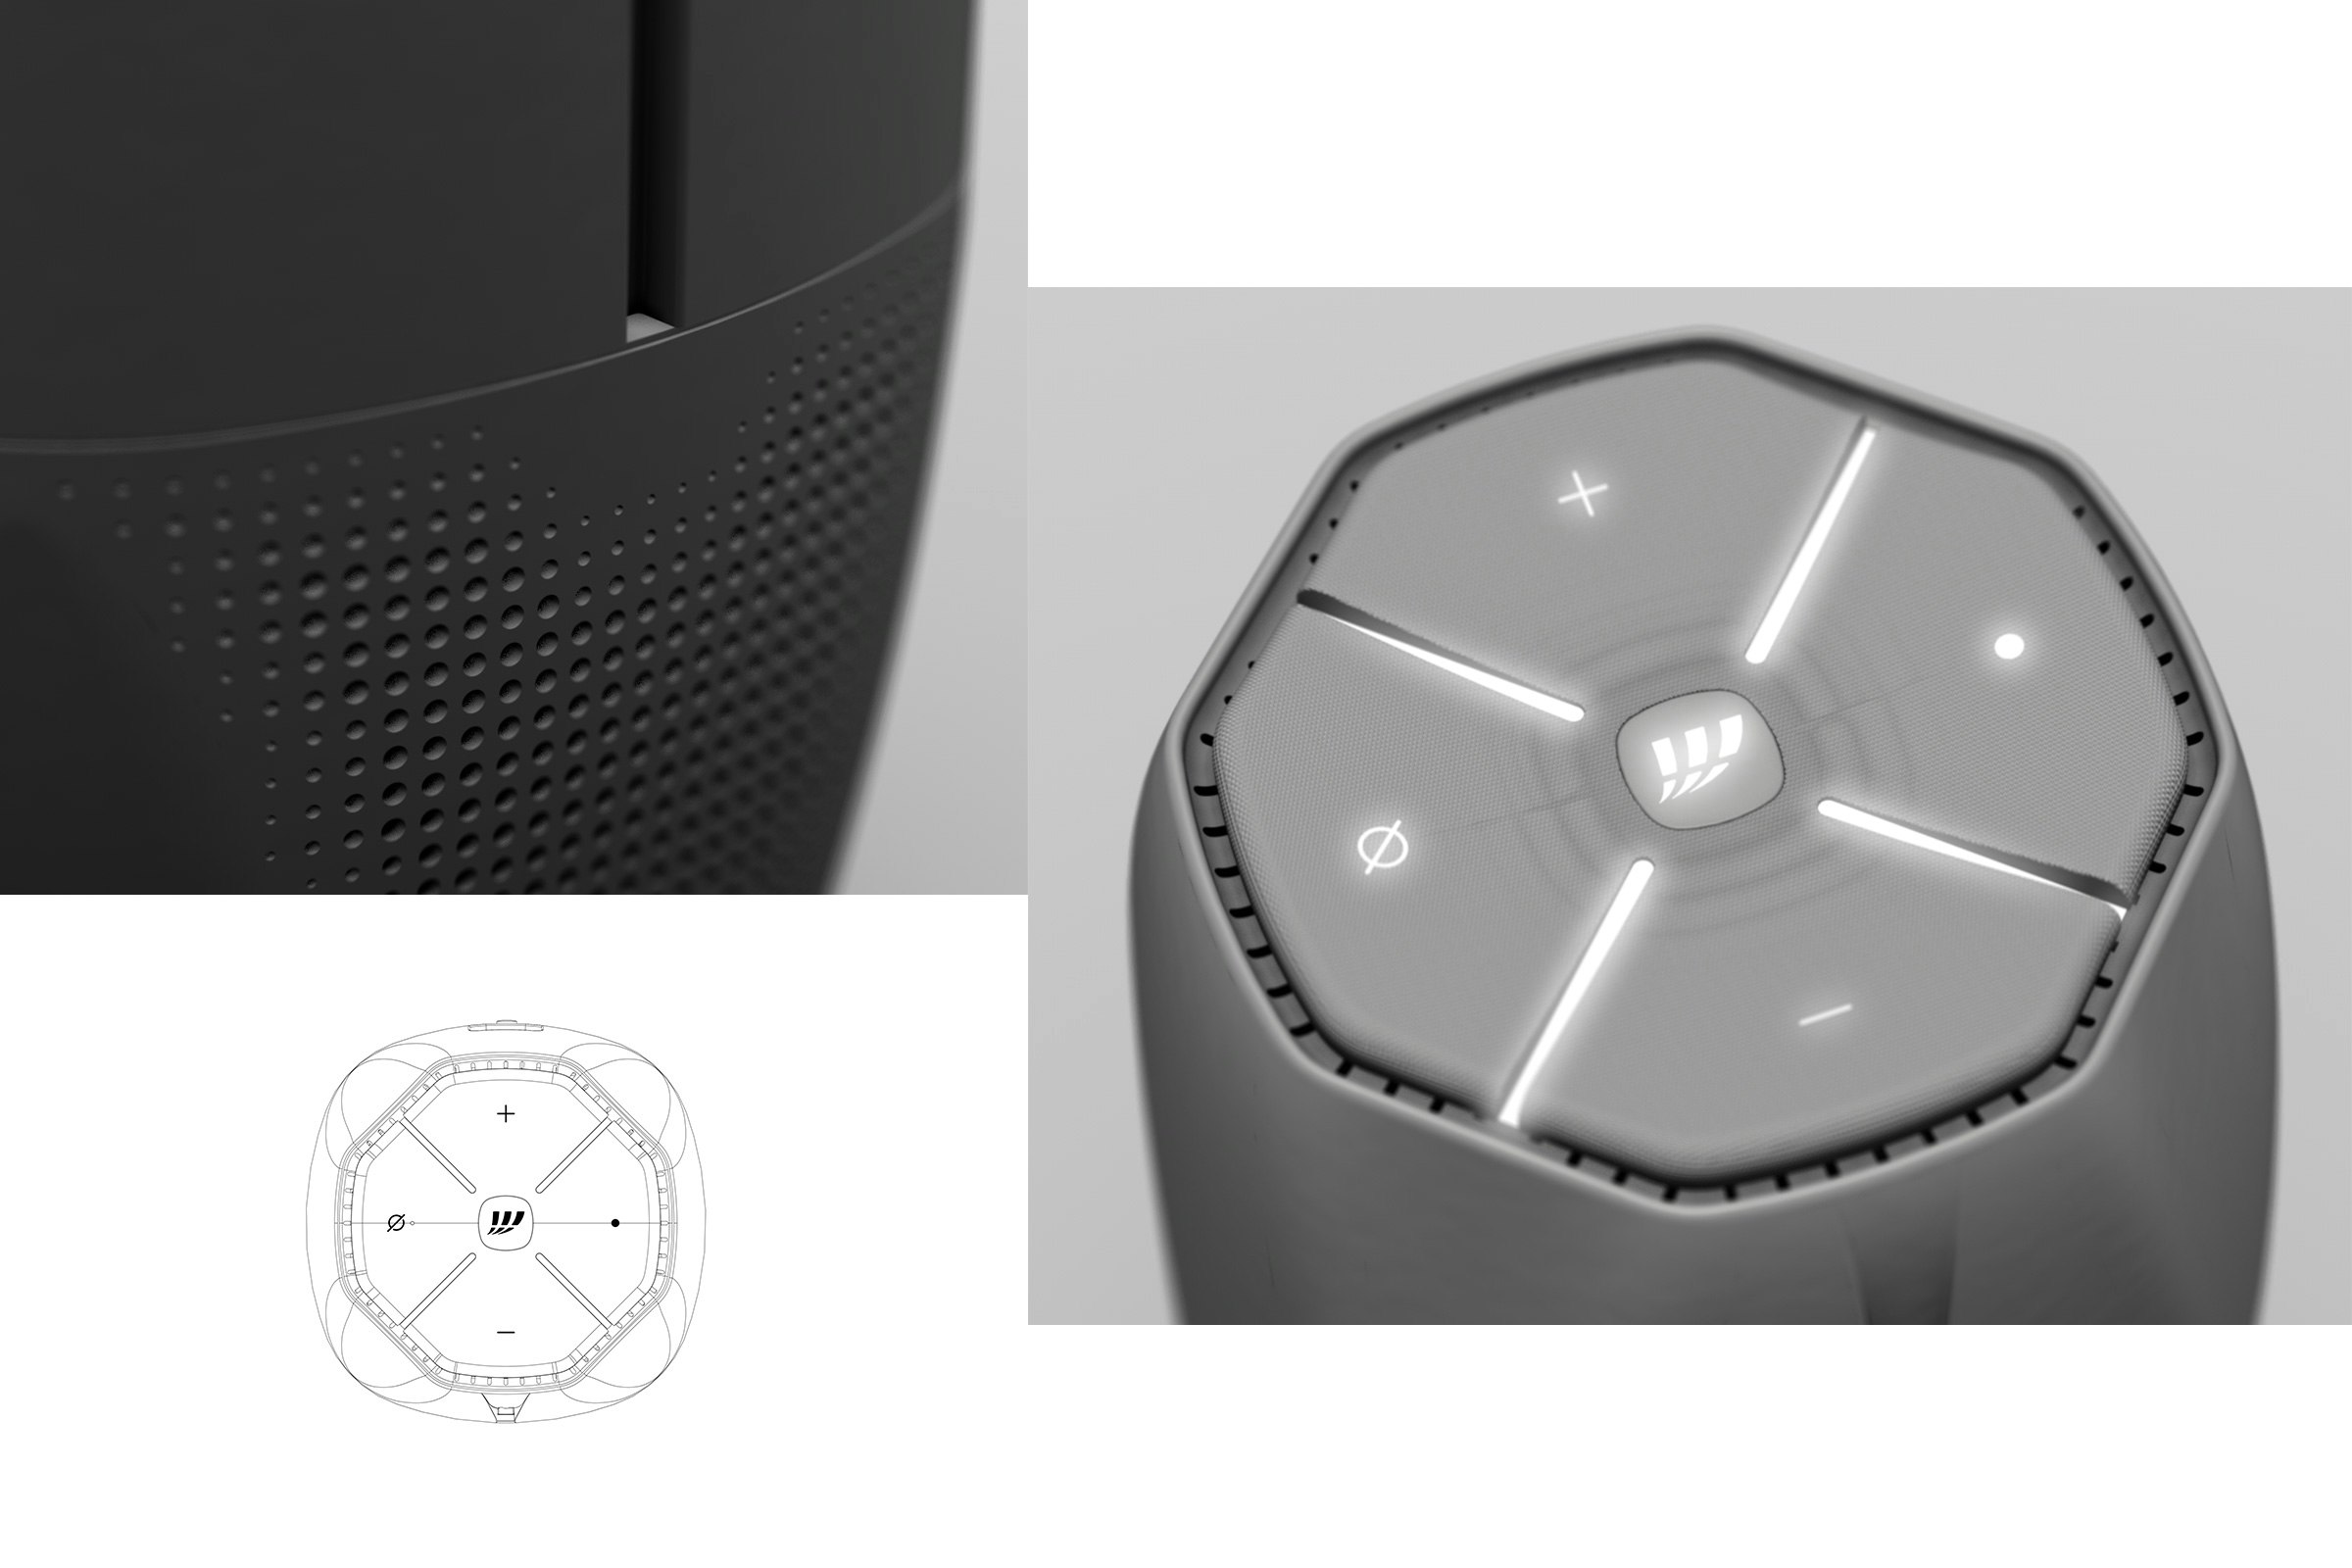 Product concept of the NeXXt Internet Box, detail view of interaction elements